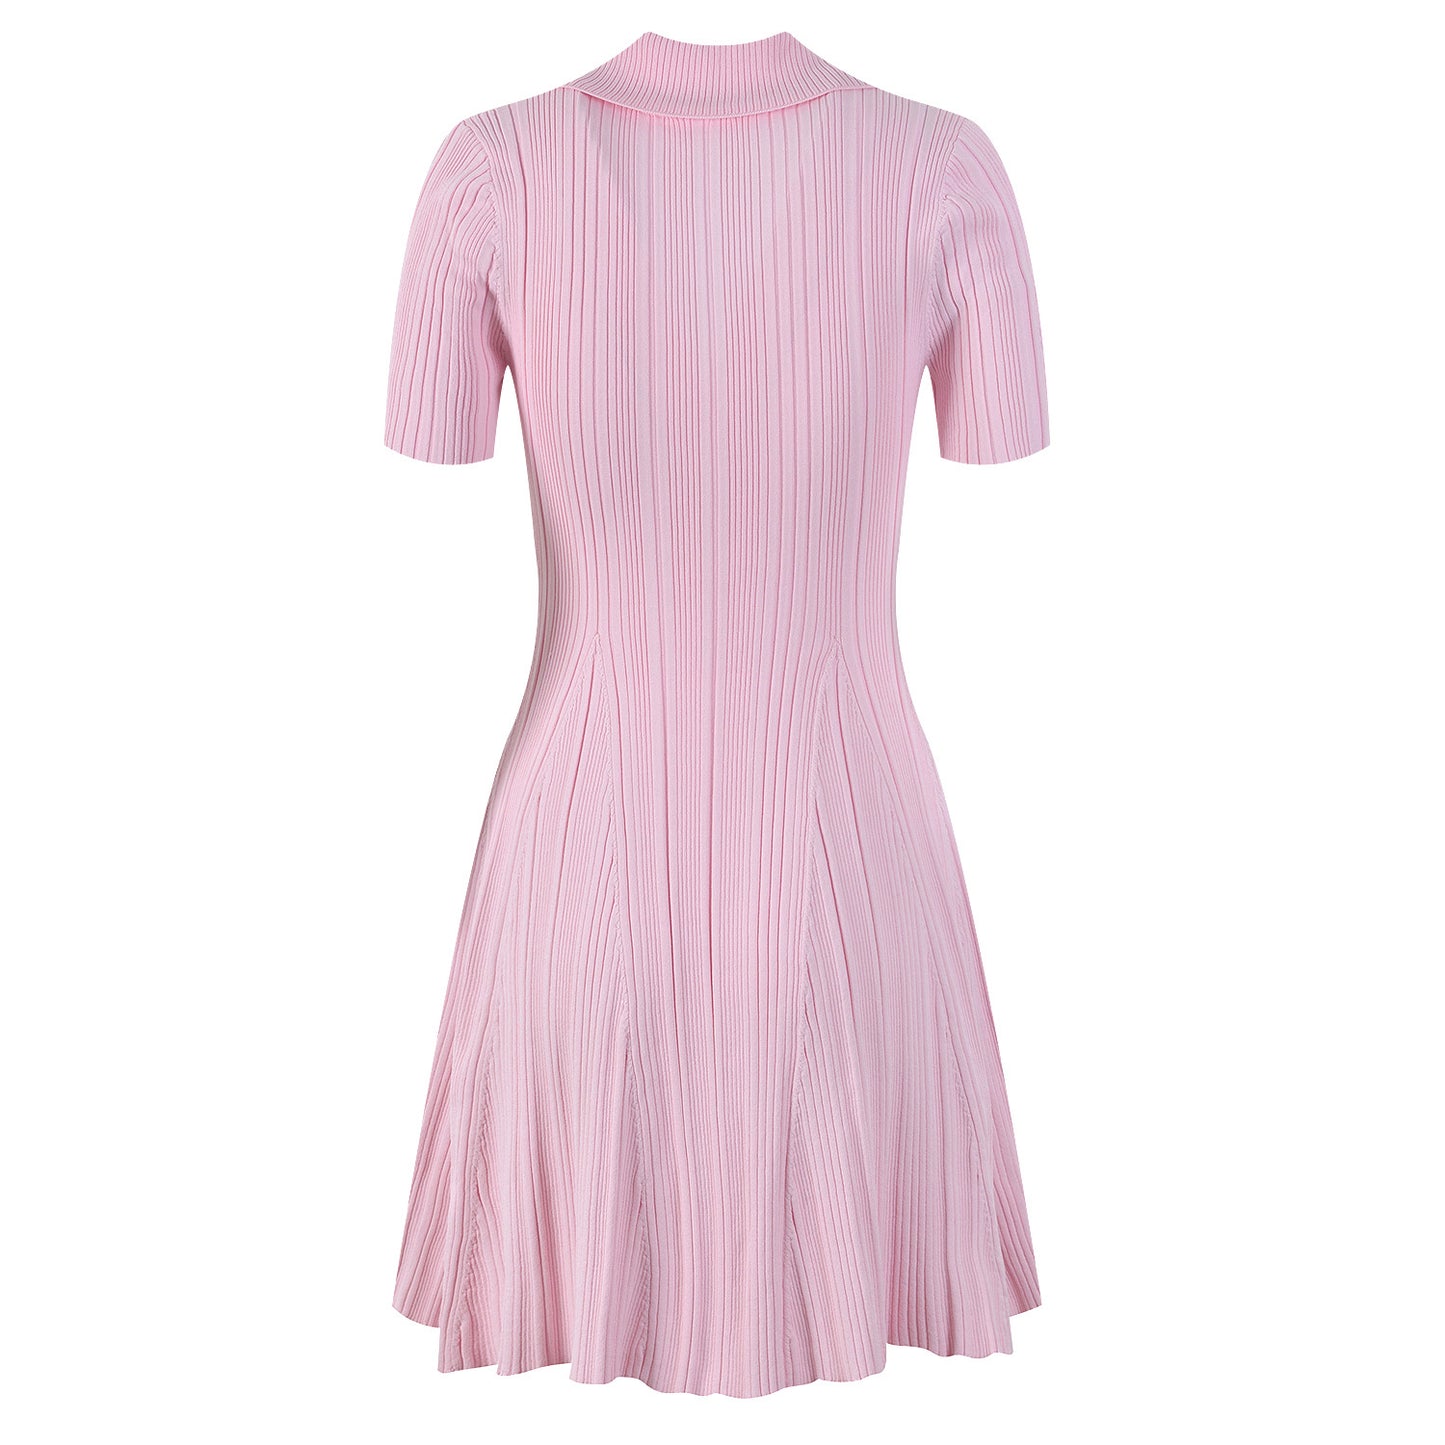 French vintage small fragrance short sleeve dress women's spring and summer small man solid color lapel waist short A-line skirt